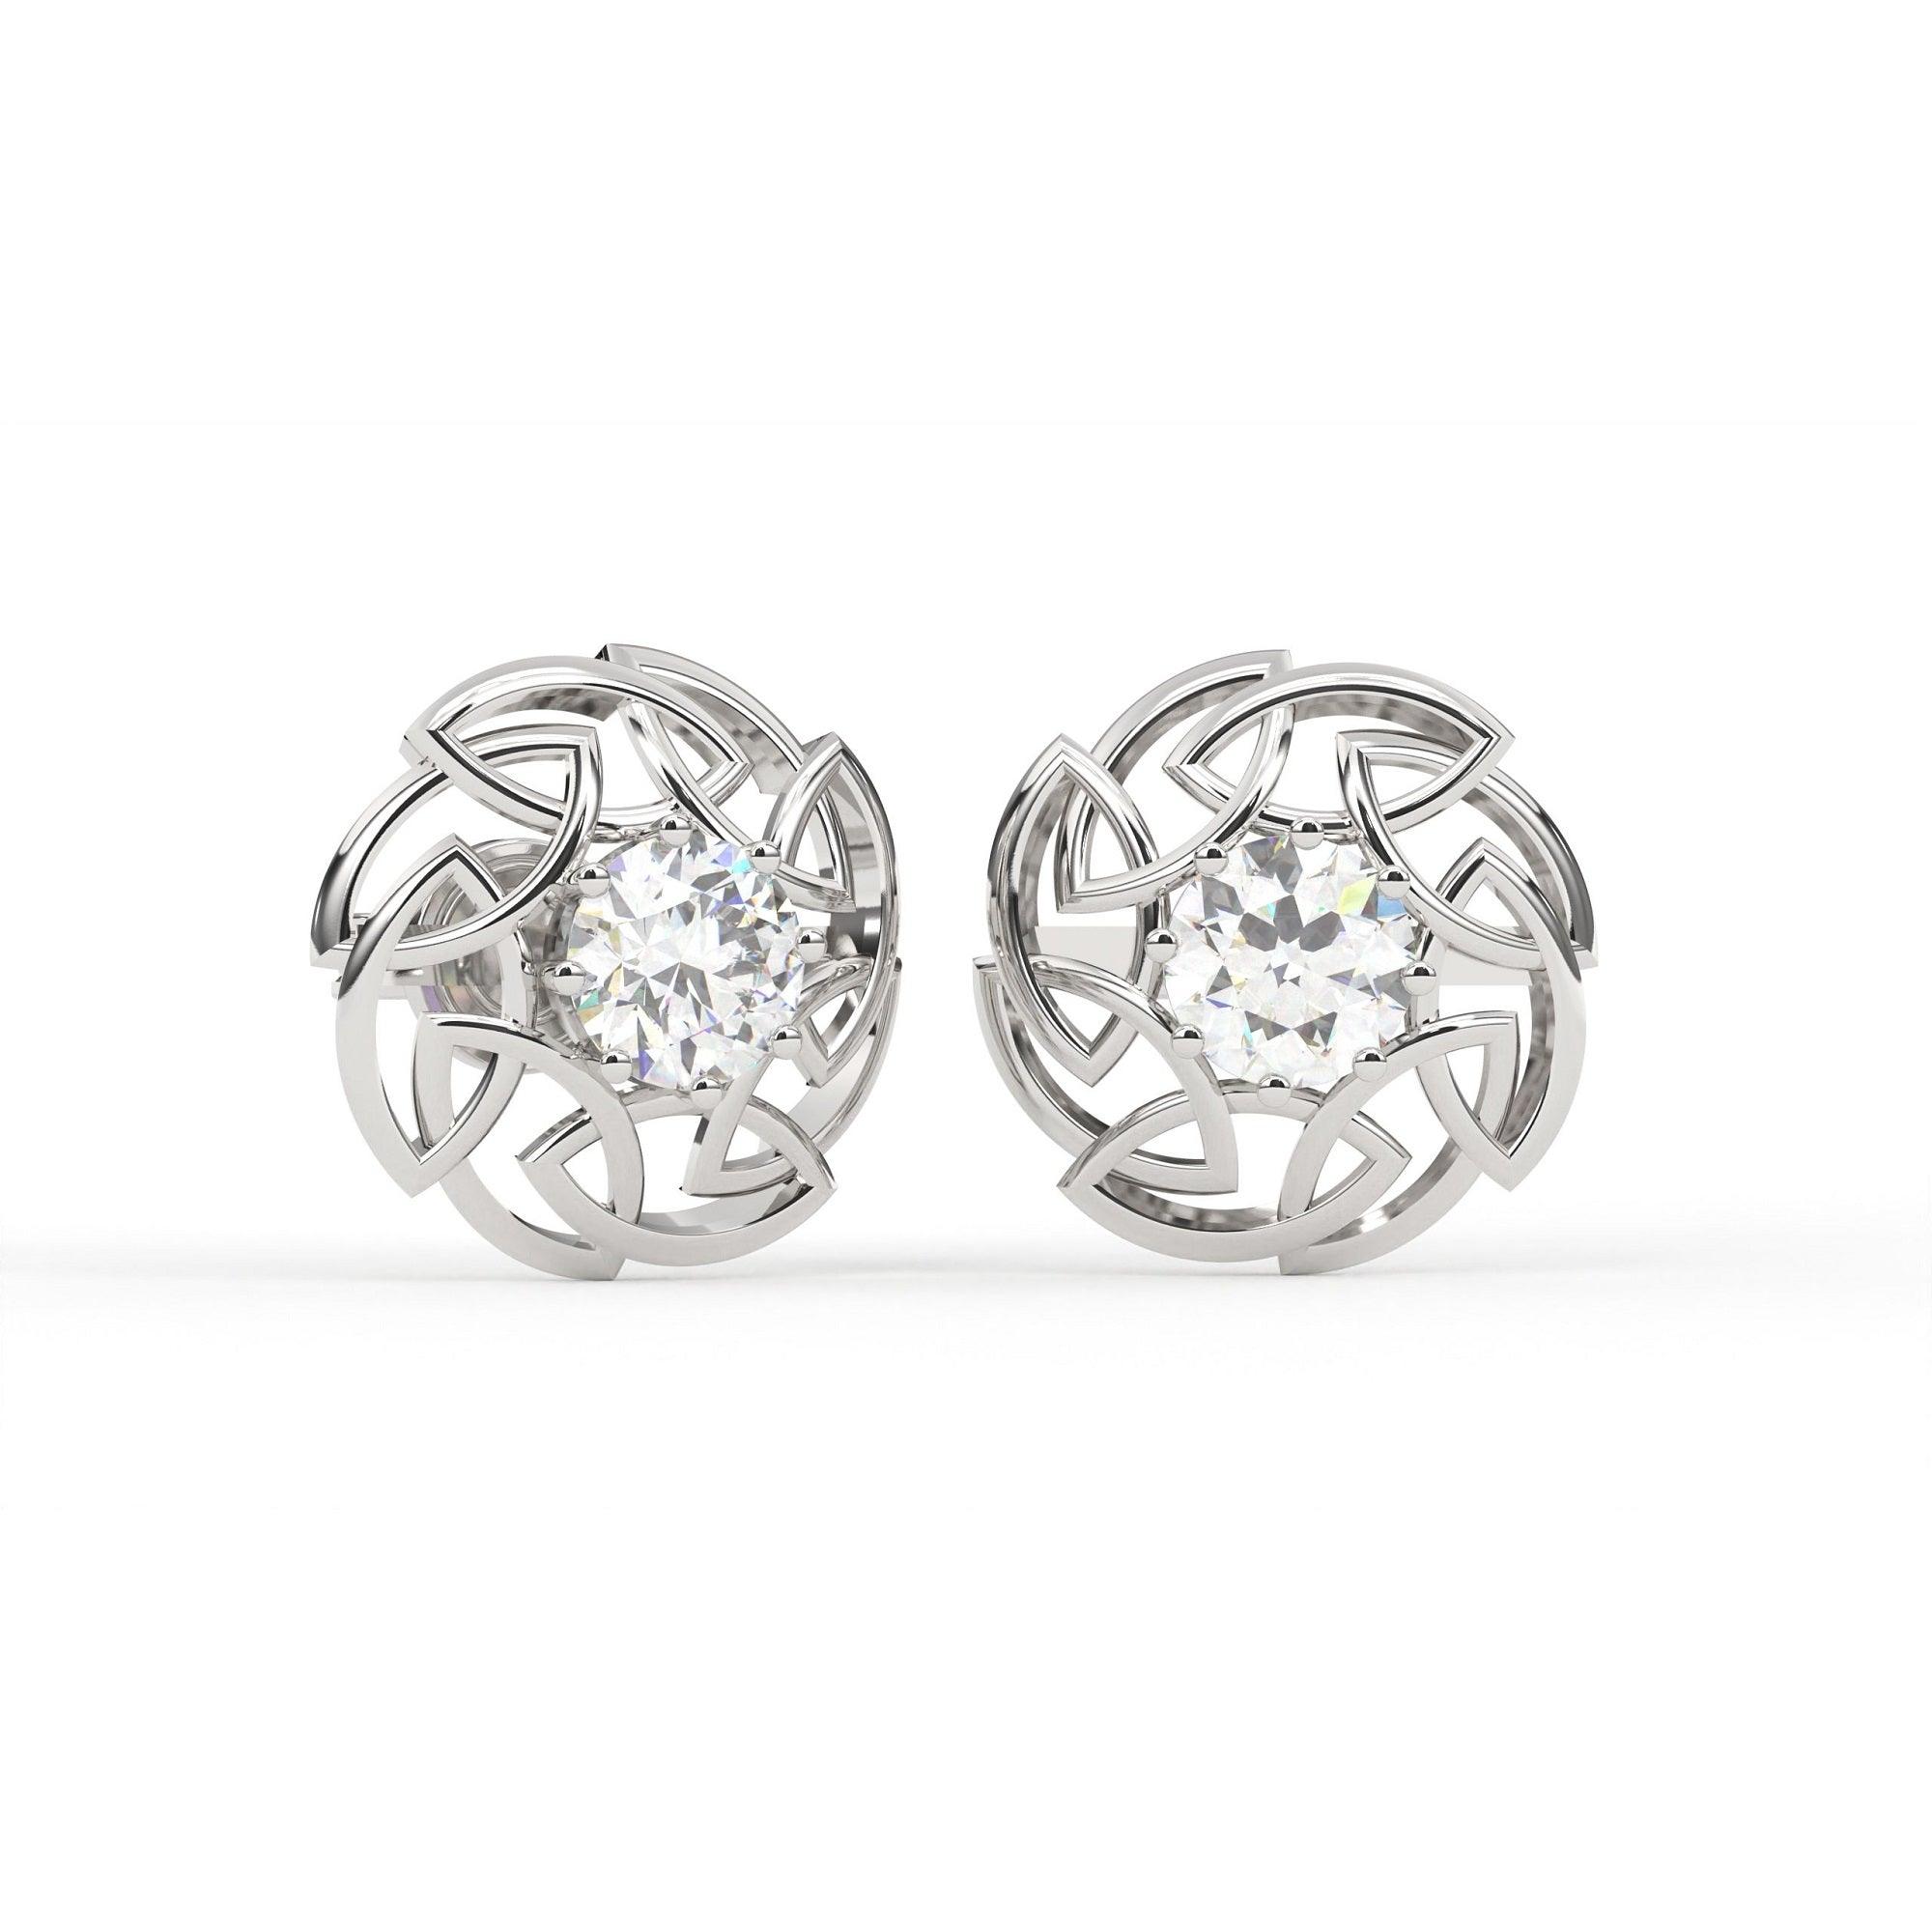 Auory 925 Sterling Silver Round Earring AUPE-317 - Auory